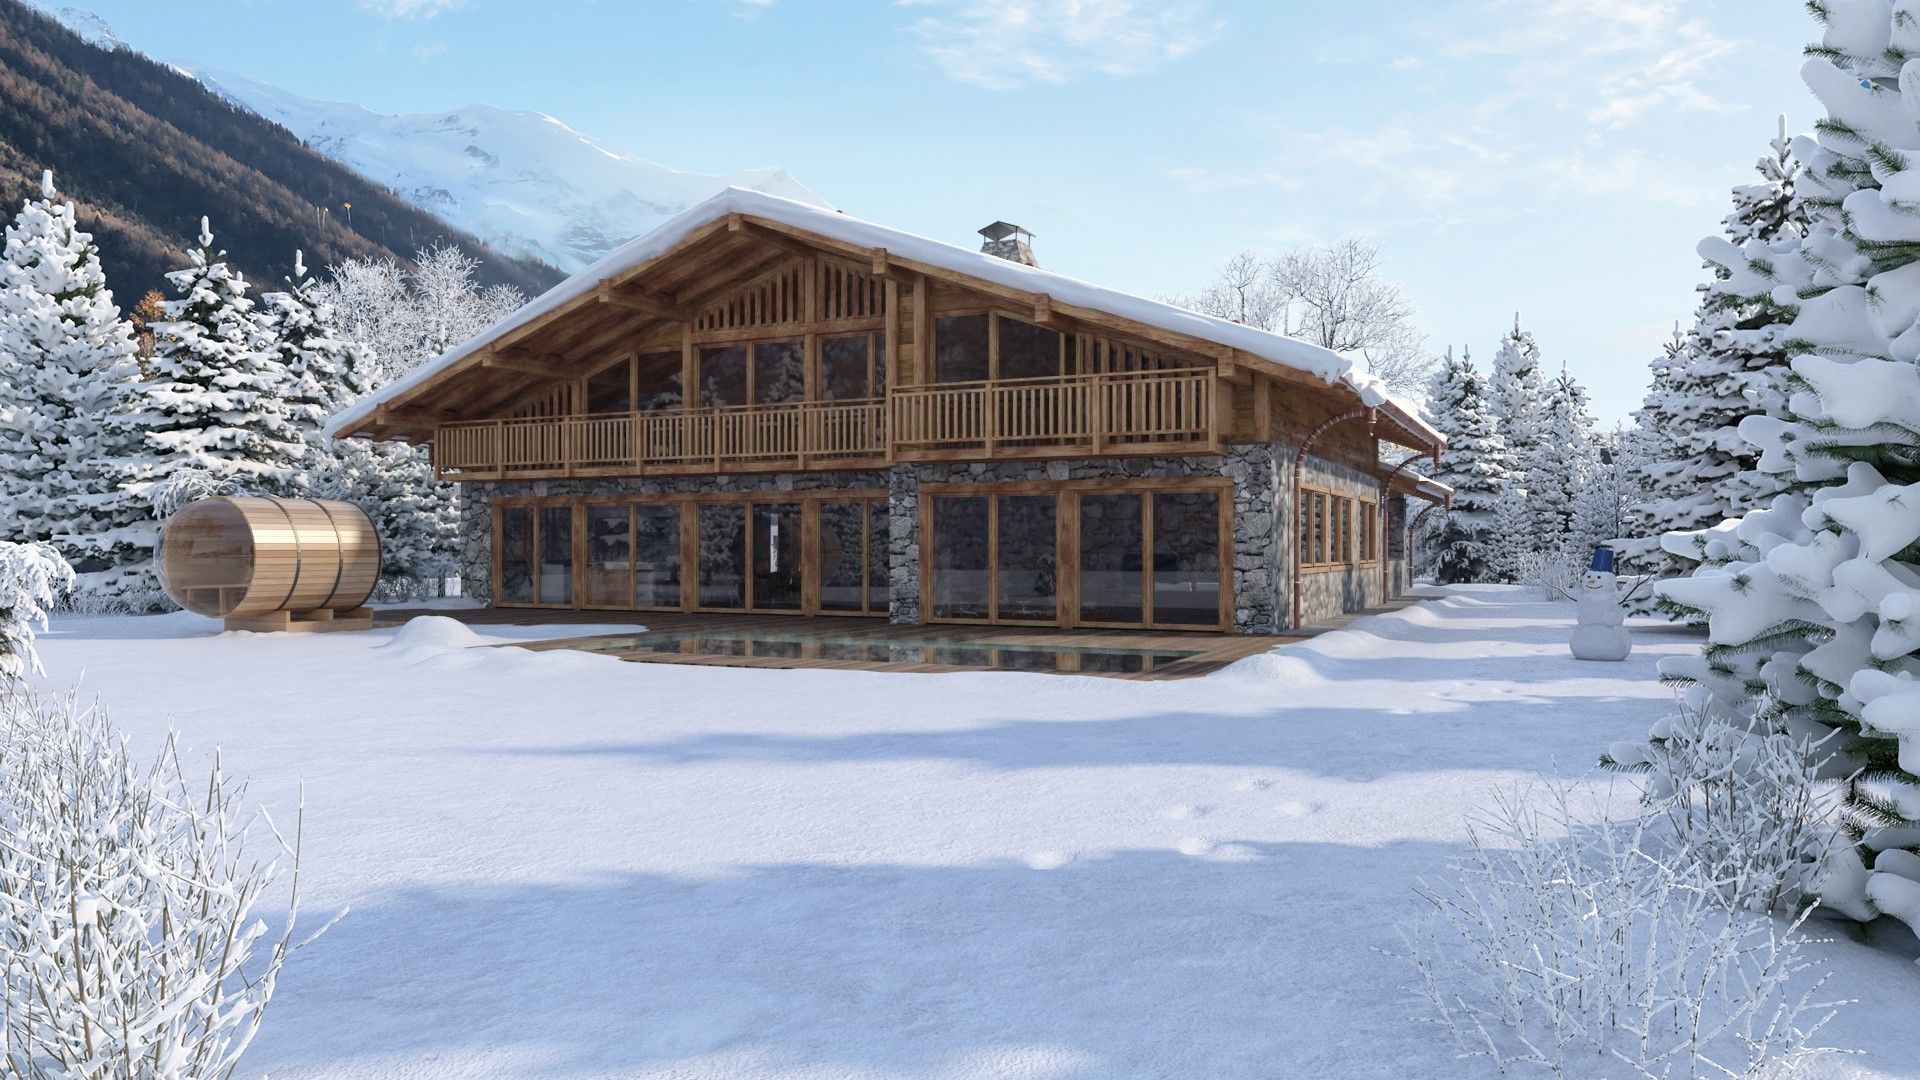  bed New Development For Sale in Chamonix Mont Blanc, French Alps